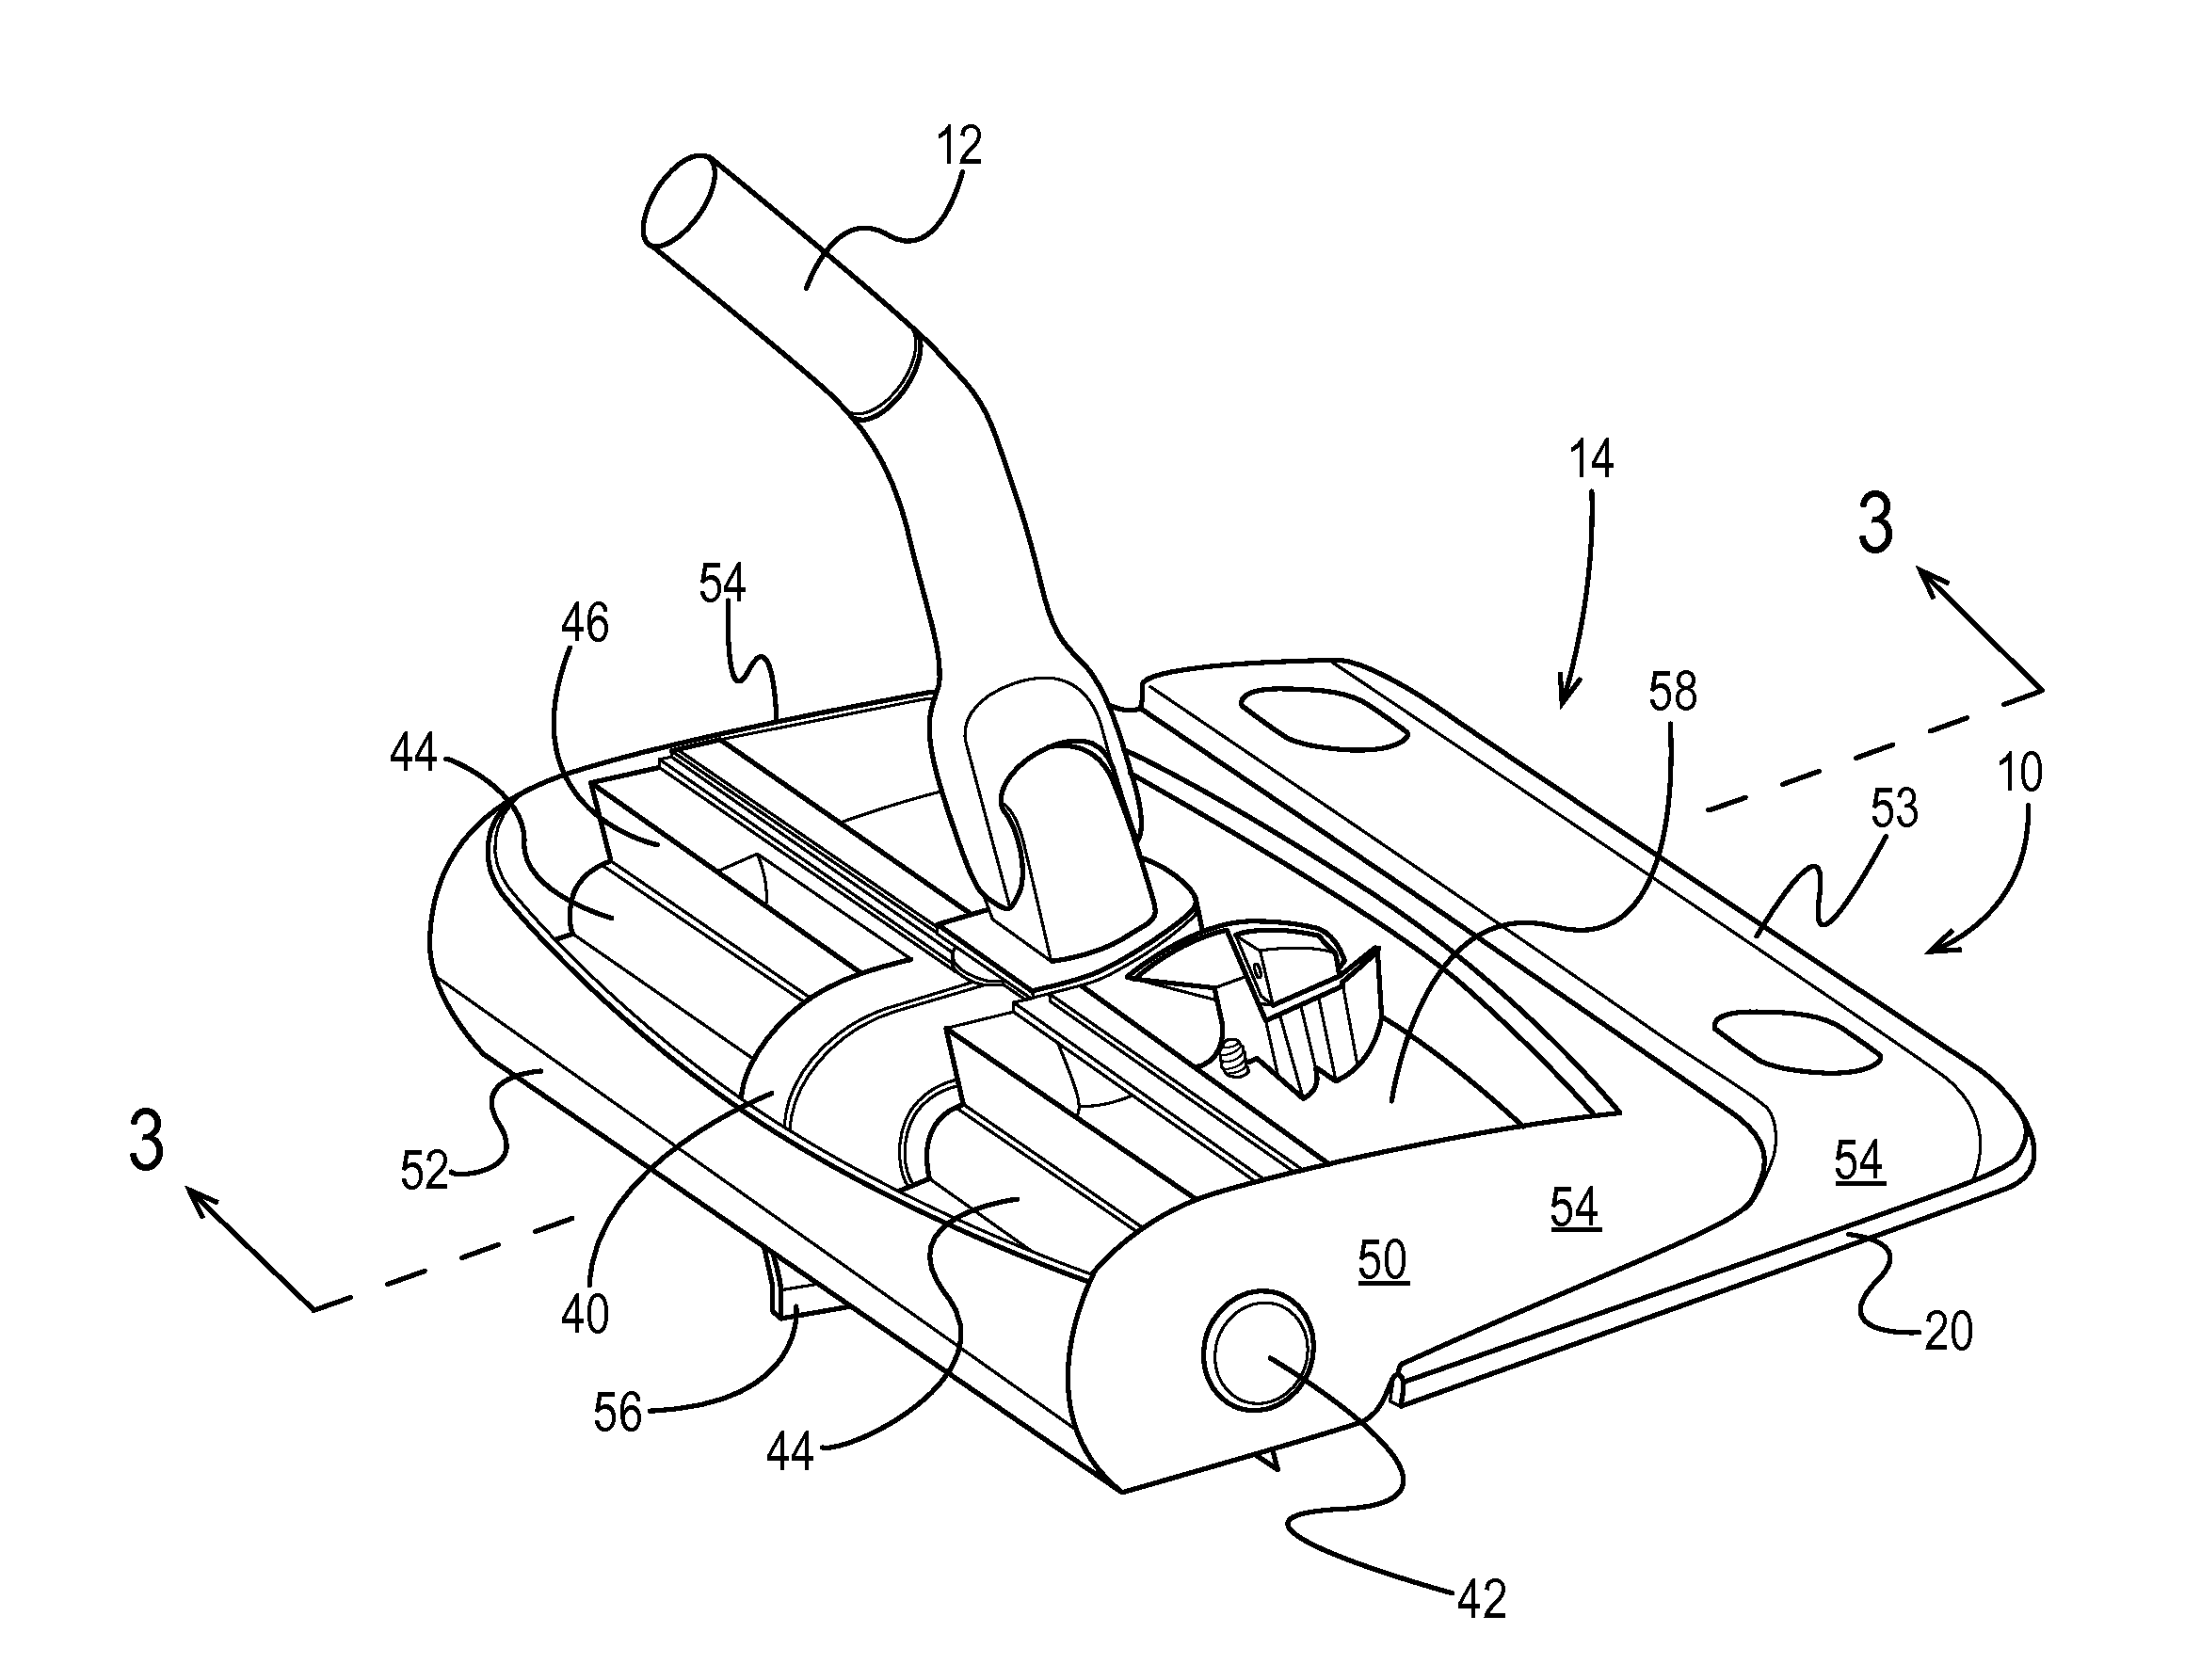 Floor cleaning device having disposable floor sheets and rotatable beater bar and method of cleaning a floor therewith